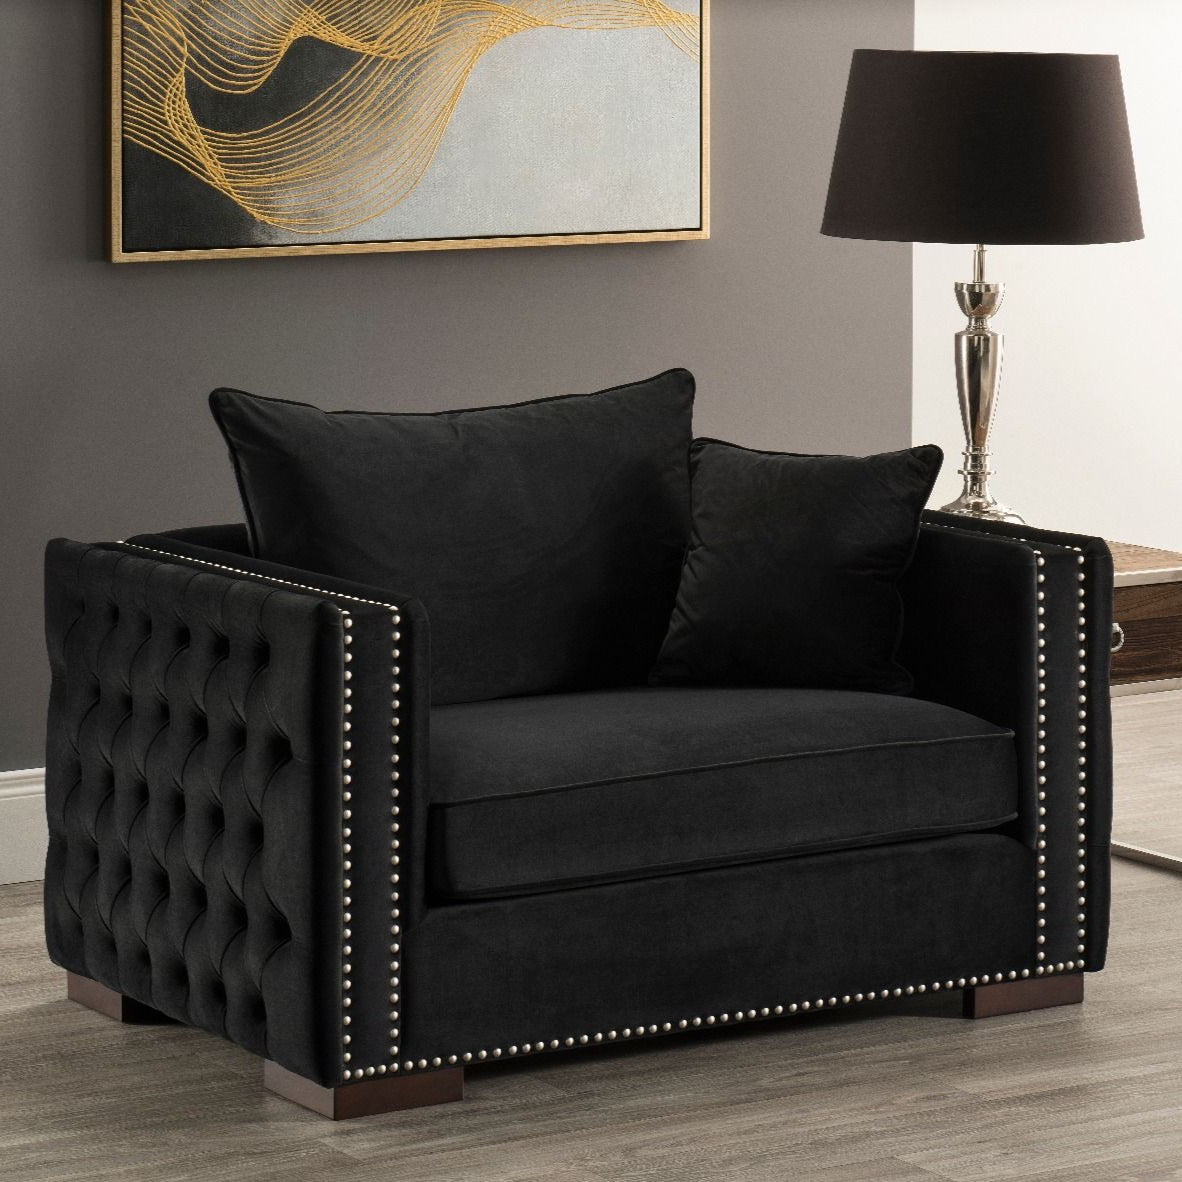 Moscow Snuggle Chair Black Velvet Chicmyroom